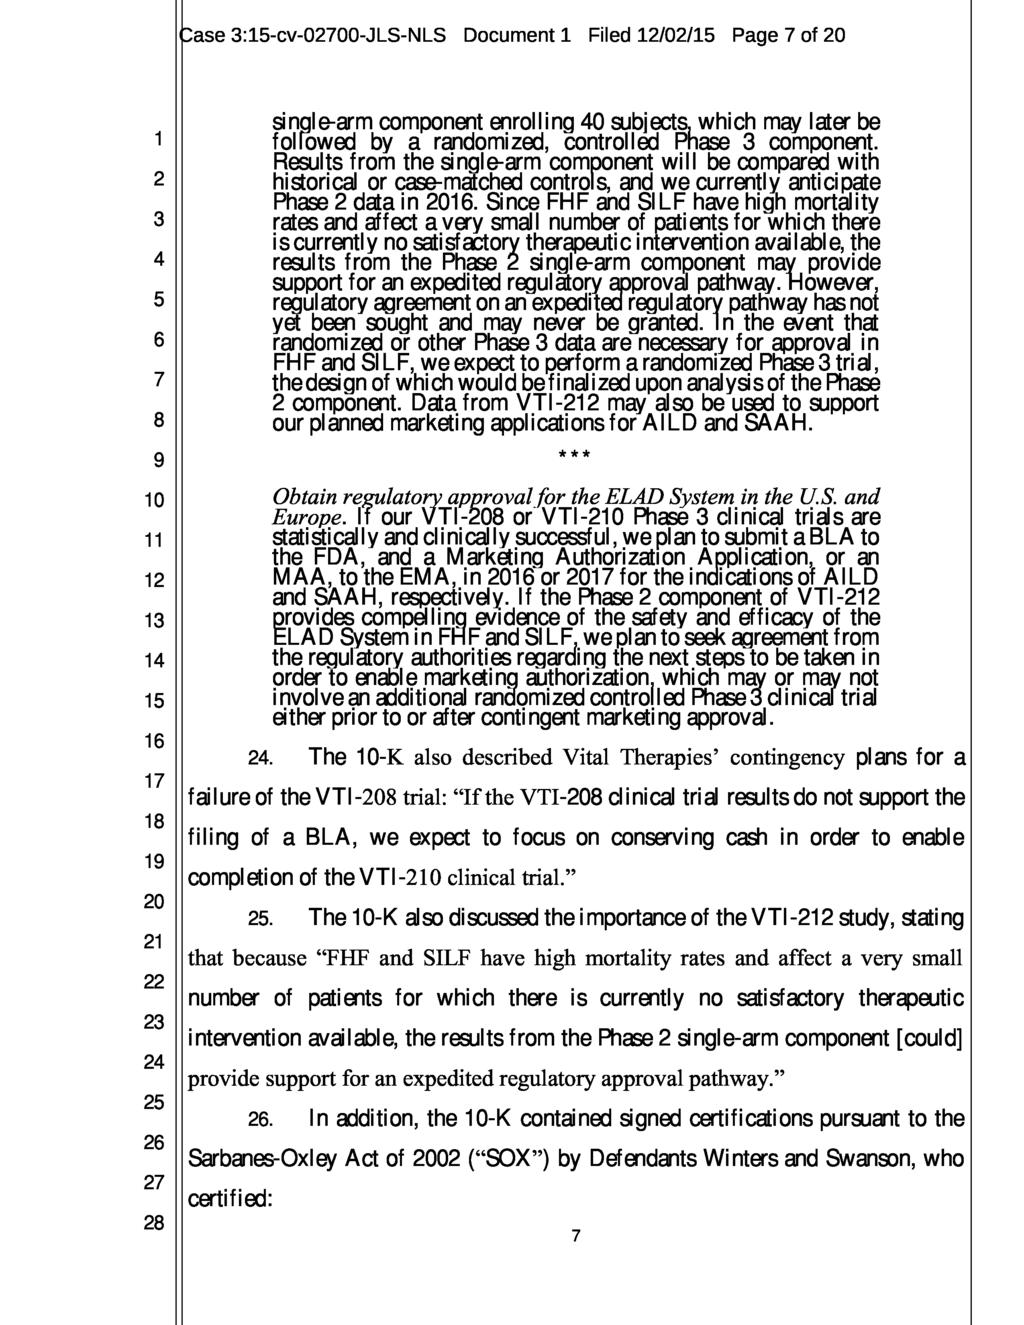 3:15-cv-000-JLS-NLS Document 1 Filed 12/02/15 Page 7 of 20 1 2 3 4 5 6 7 8 9 10 11 12 13 14 15 16 17 18 19 20 21 22 23 single-arm component enrolling 40 subjects, which may later be followed by a